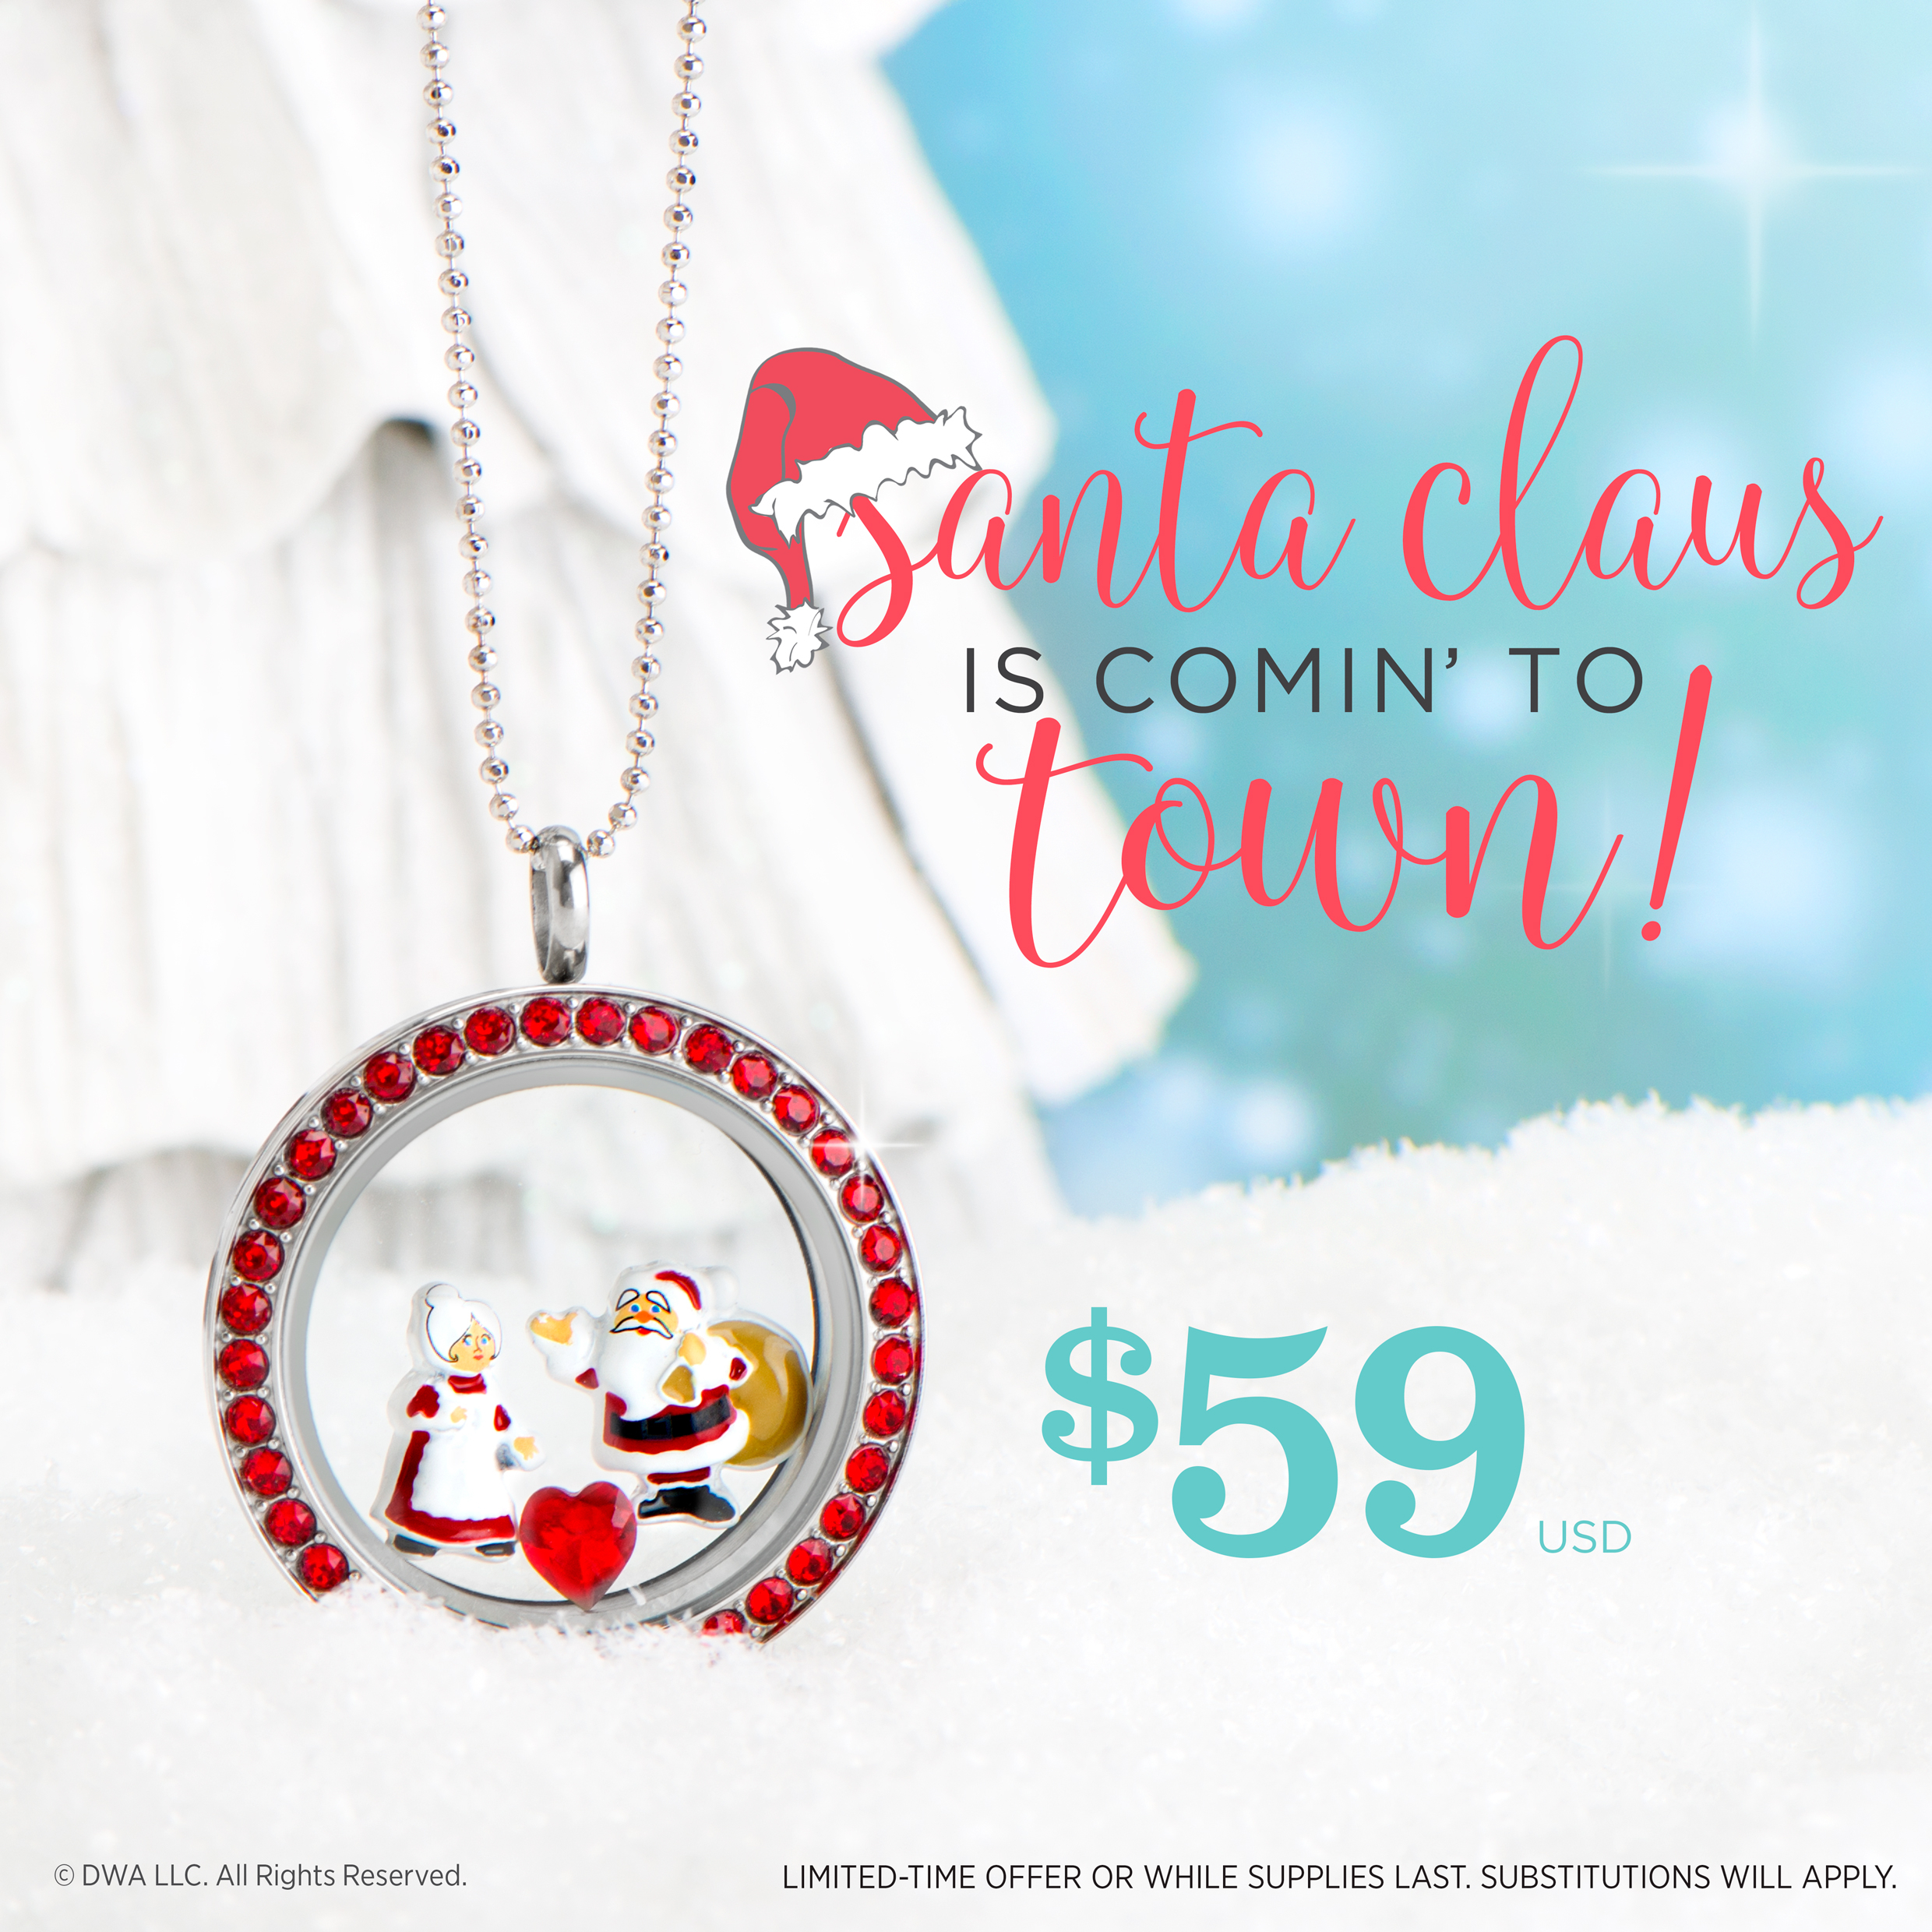 Origami Owl Christmas Charms New Limited Time Holiday Jewelry Coming To Town Free Shipping